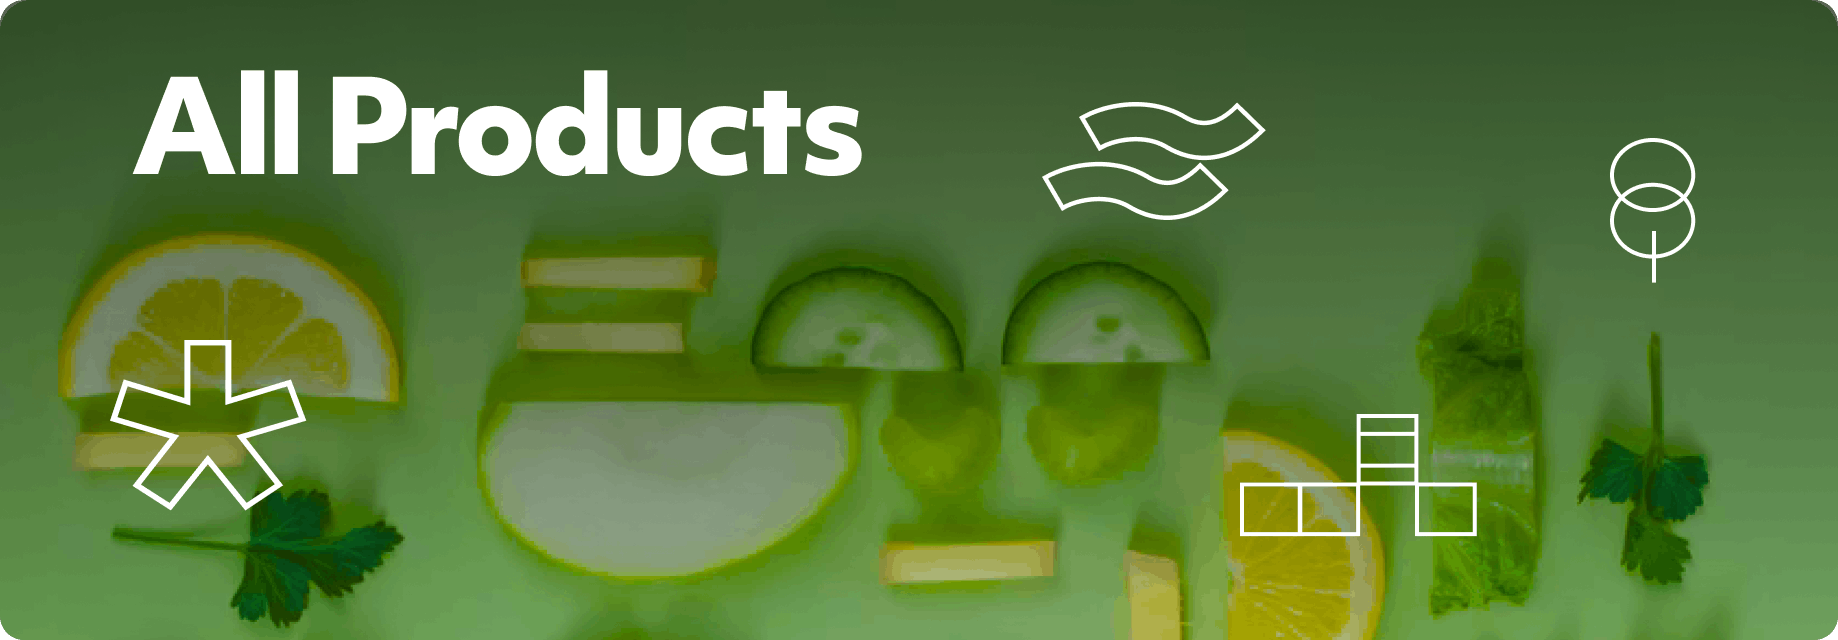 All Products Banner